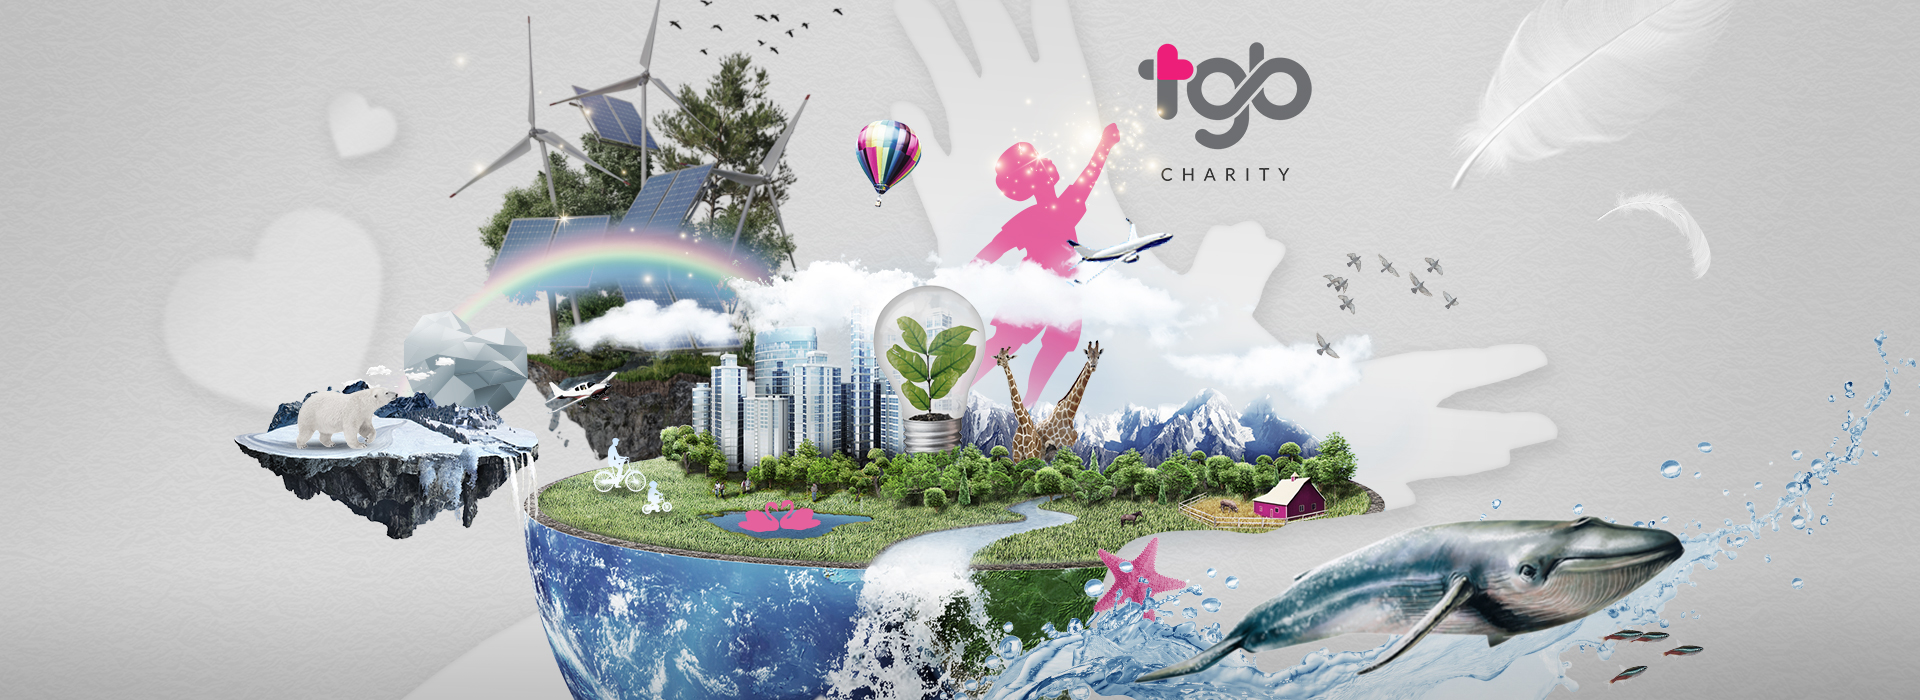 TGB Charity - What kind of future would you love?